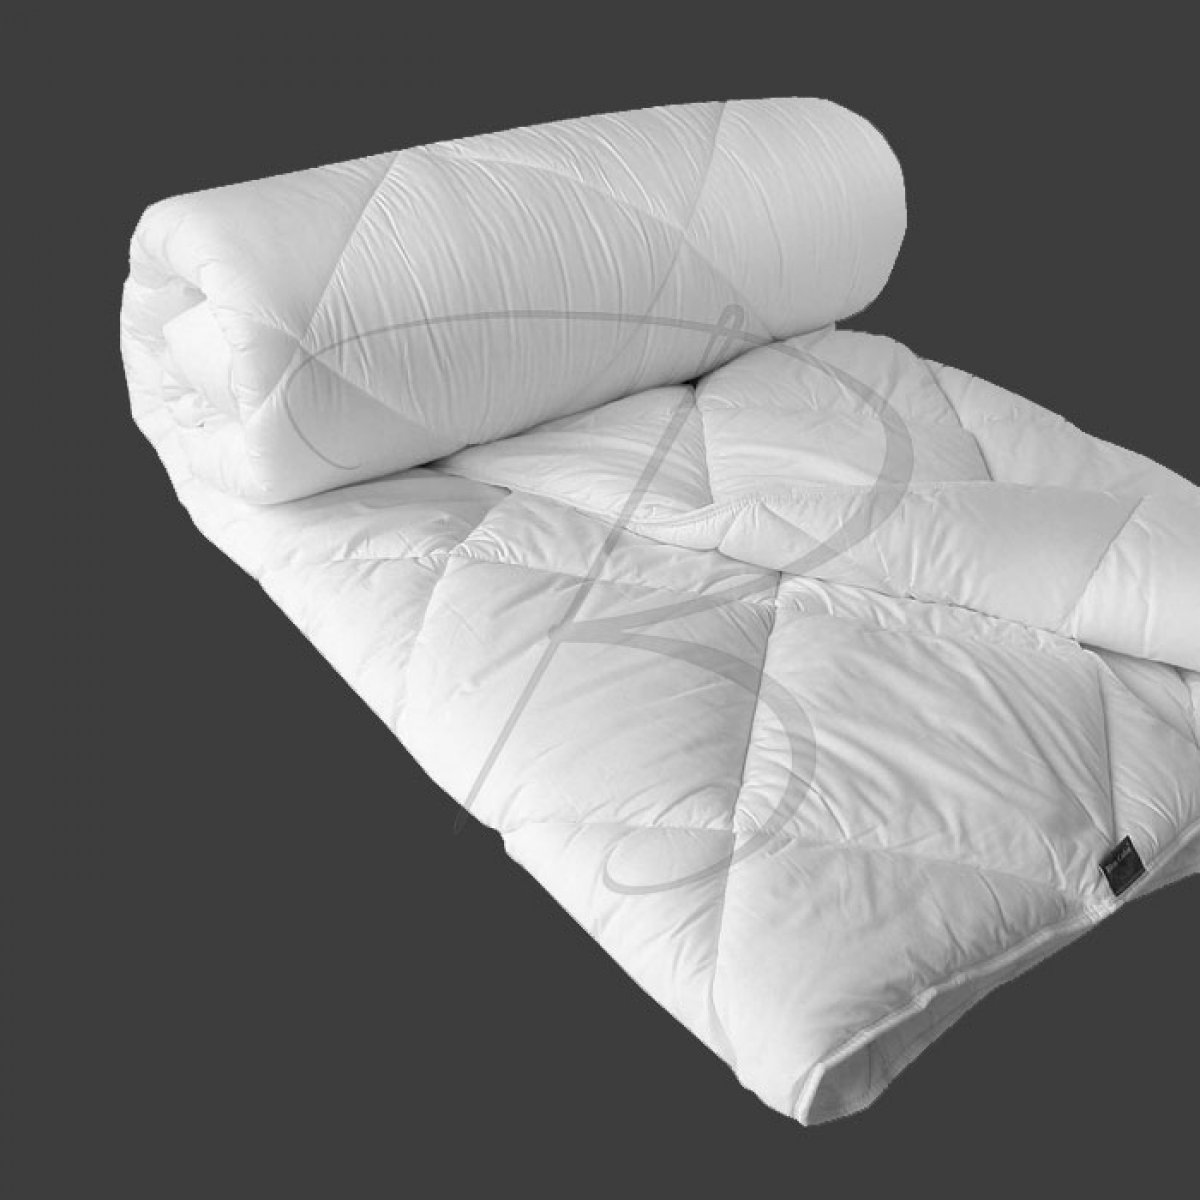 Pyrenees synthetic comforter - 350g/m² - 280 x 260